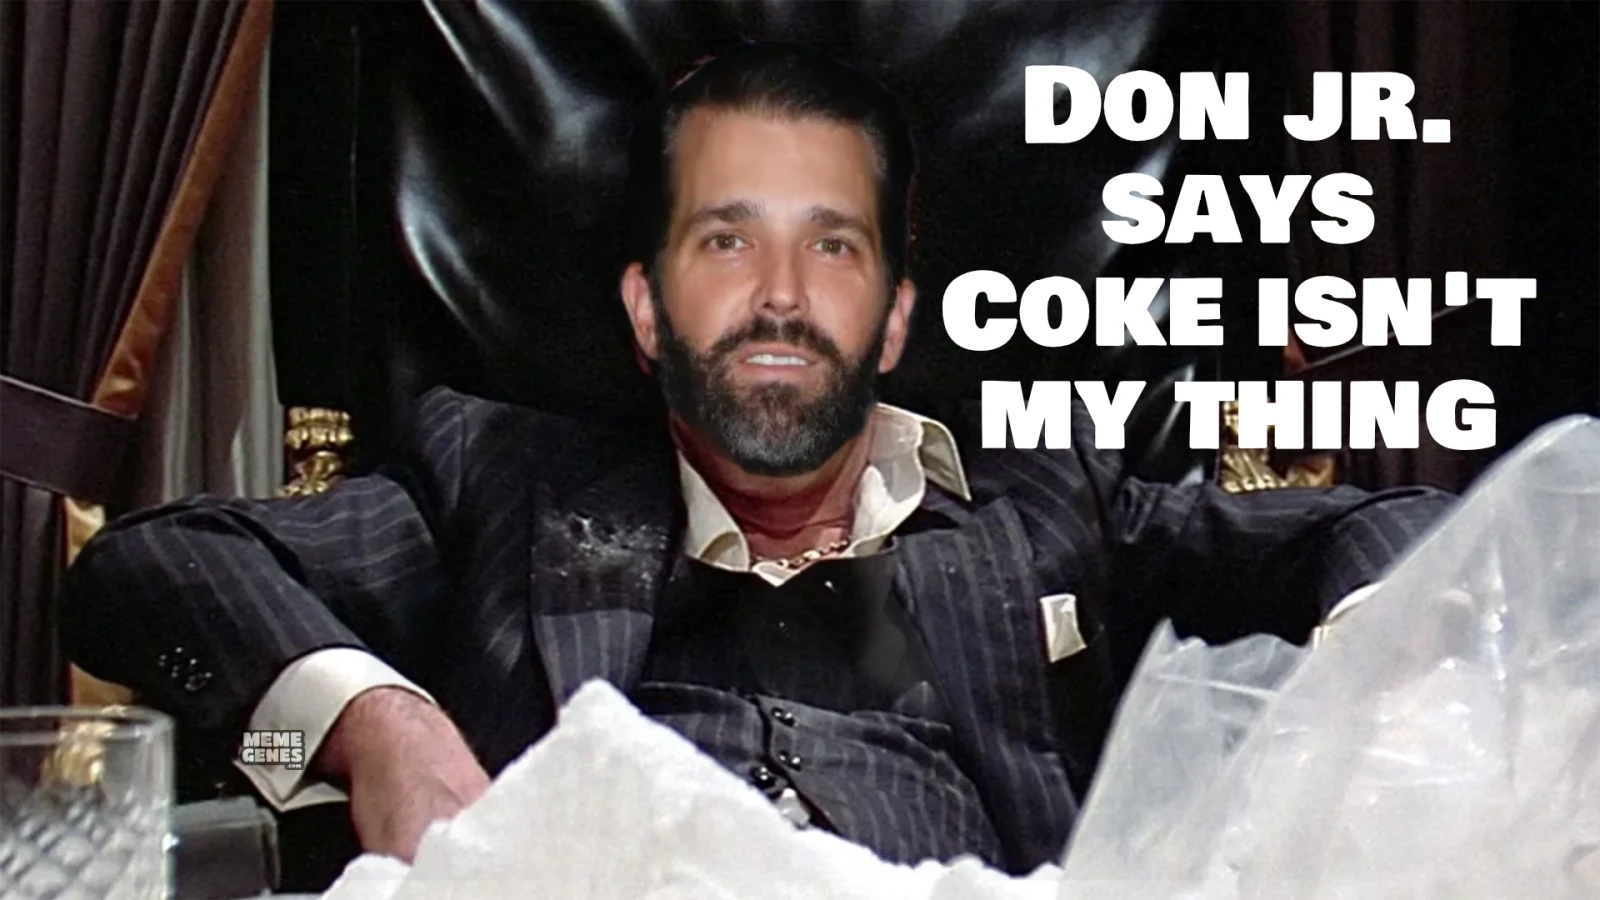 Don Jr. is a coke head - Featured image